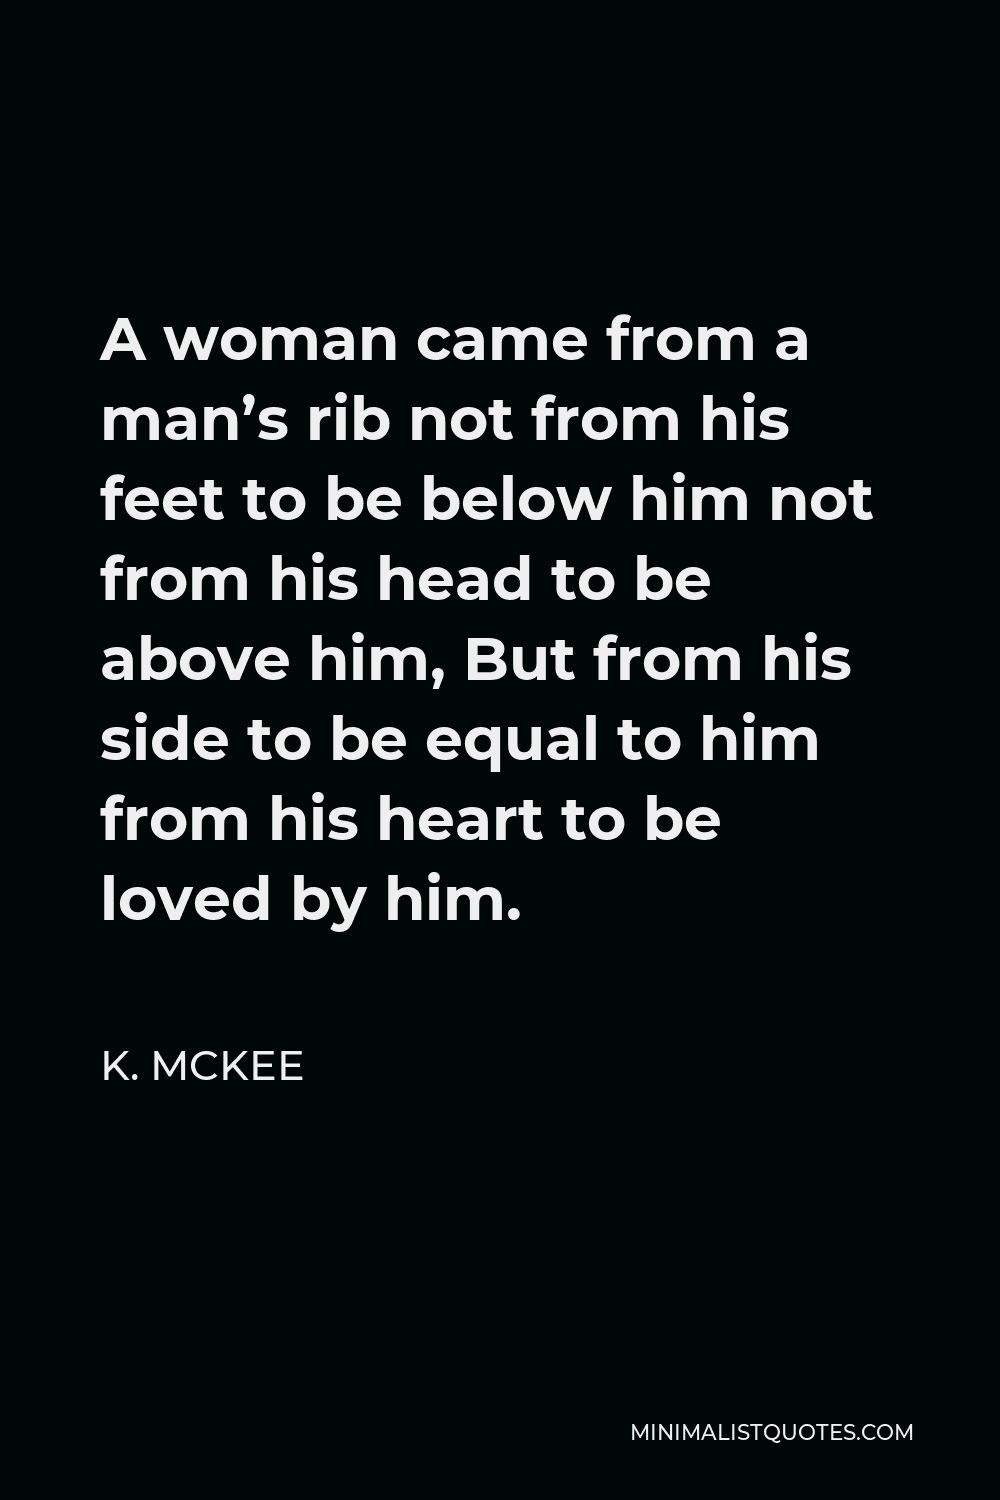 K. Mckee Quote - A woman came from a man’s rib not from his feet to be below him not from his head to be above him, But from his side to be equal to him from his heart to be loved by him.